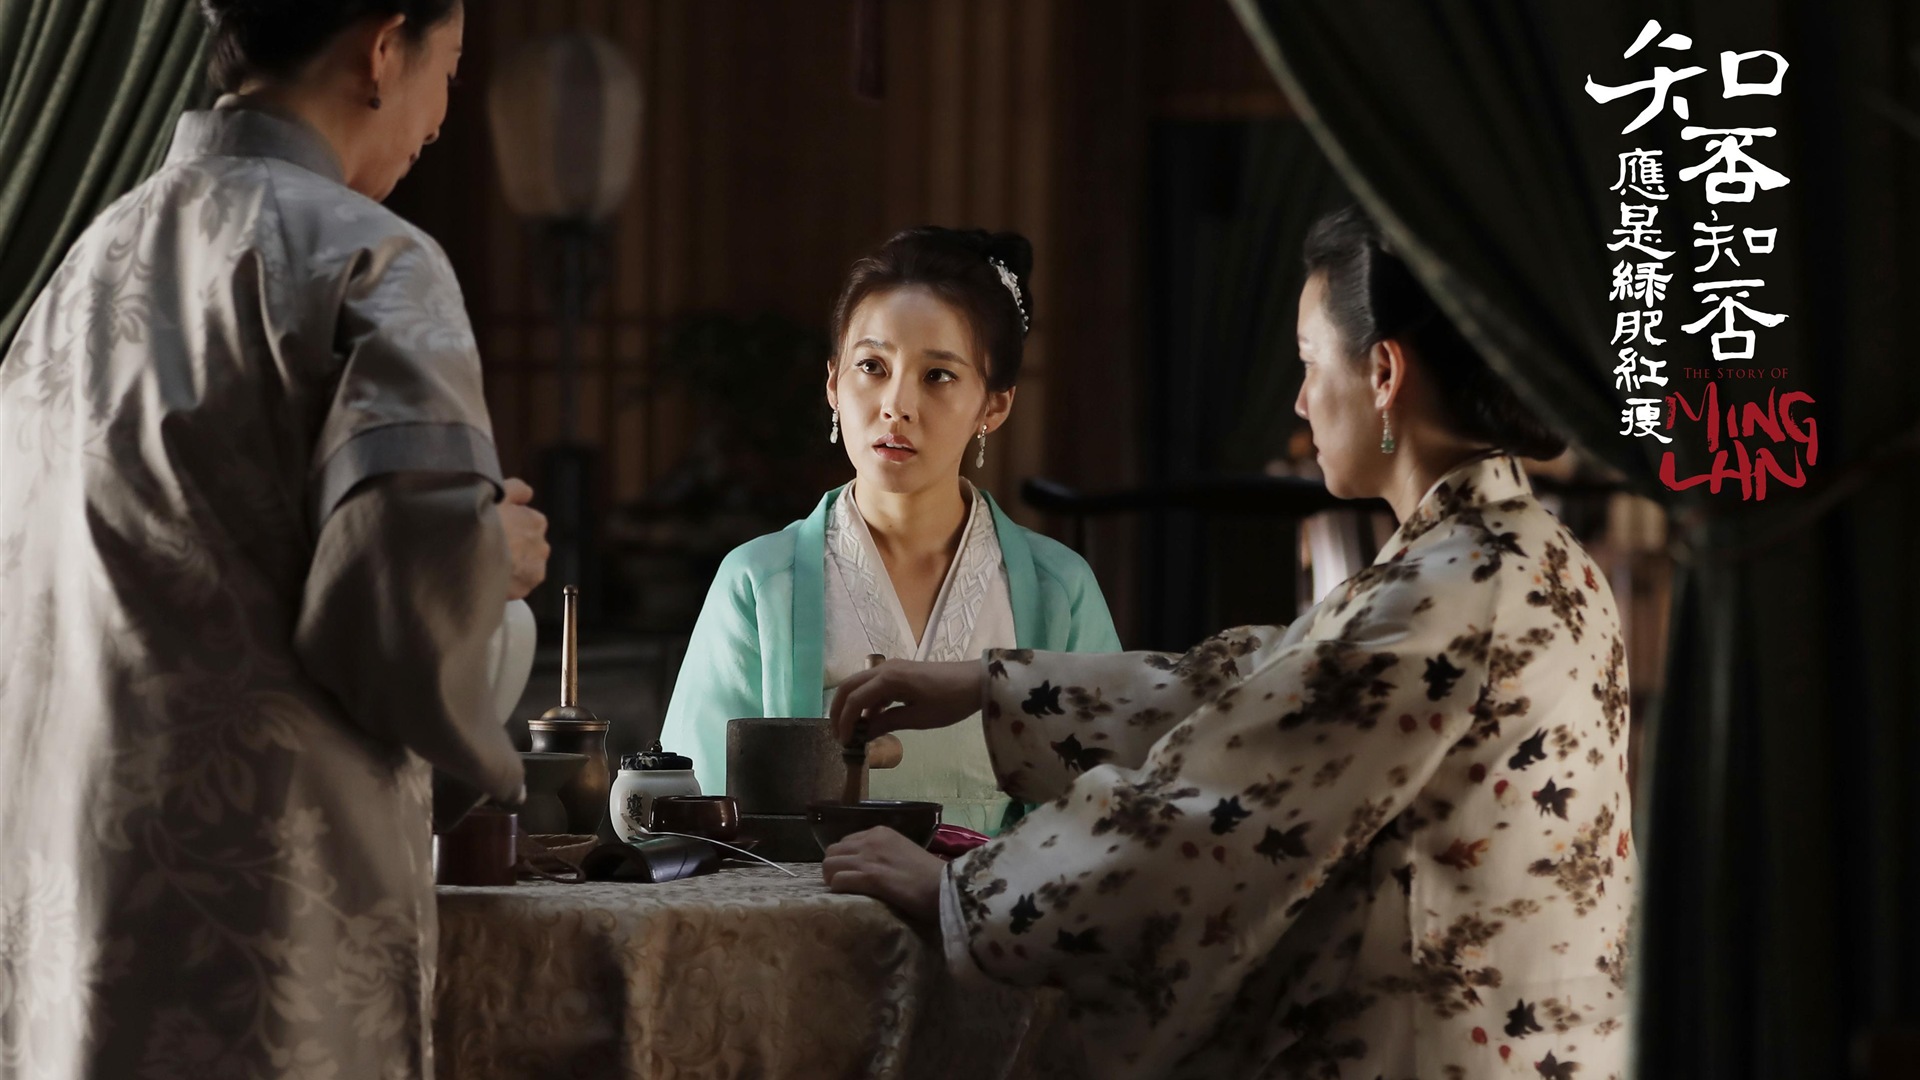 The Story Of MingLan, TV series HD wallpapers #40 - 1920x1080